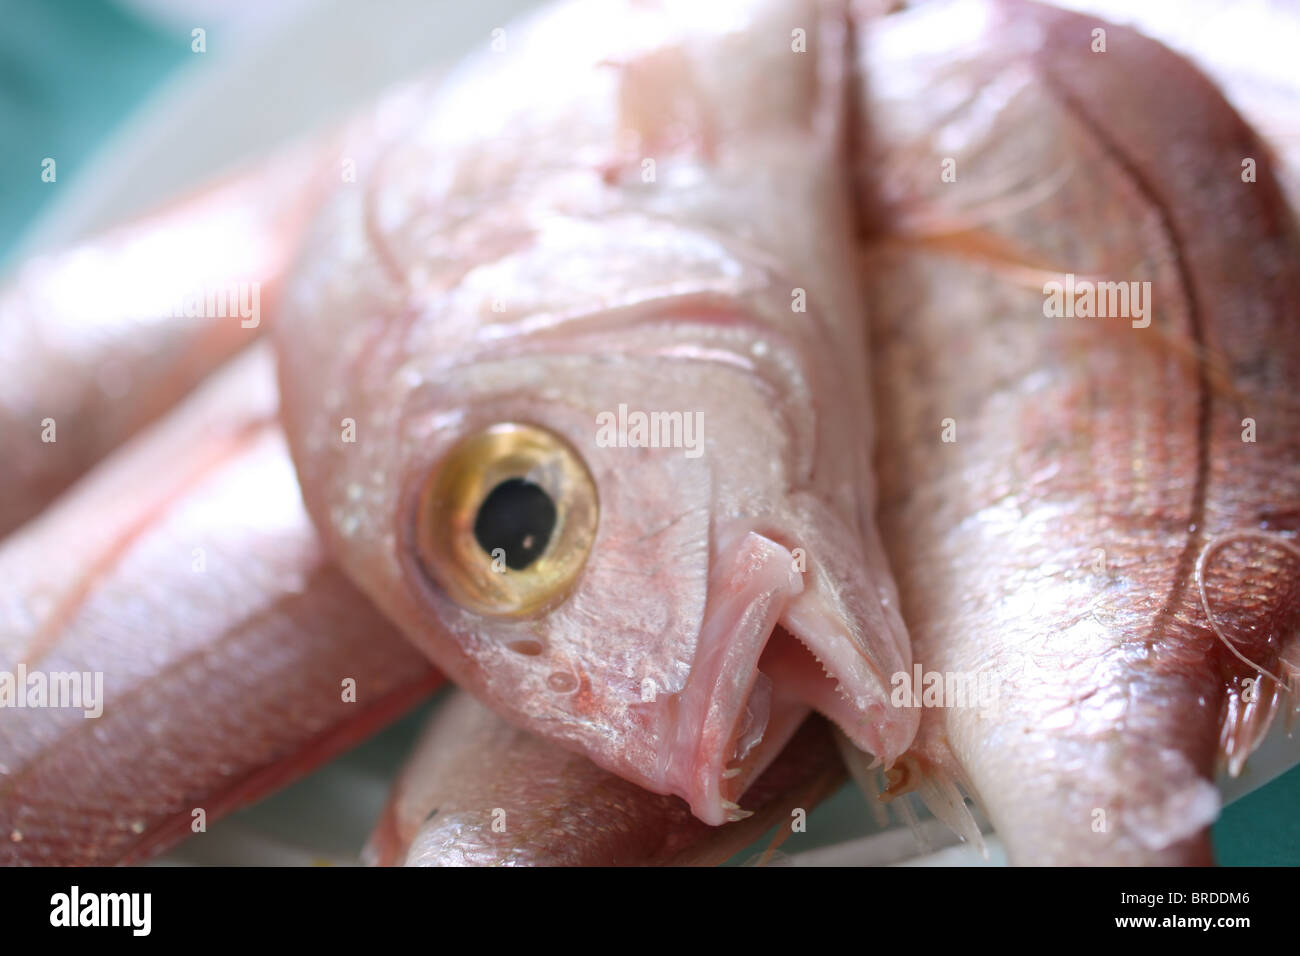 Details of raw fresh fish at the market, close-up Stock Photo